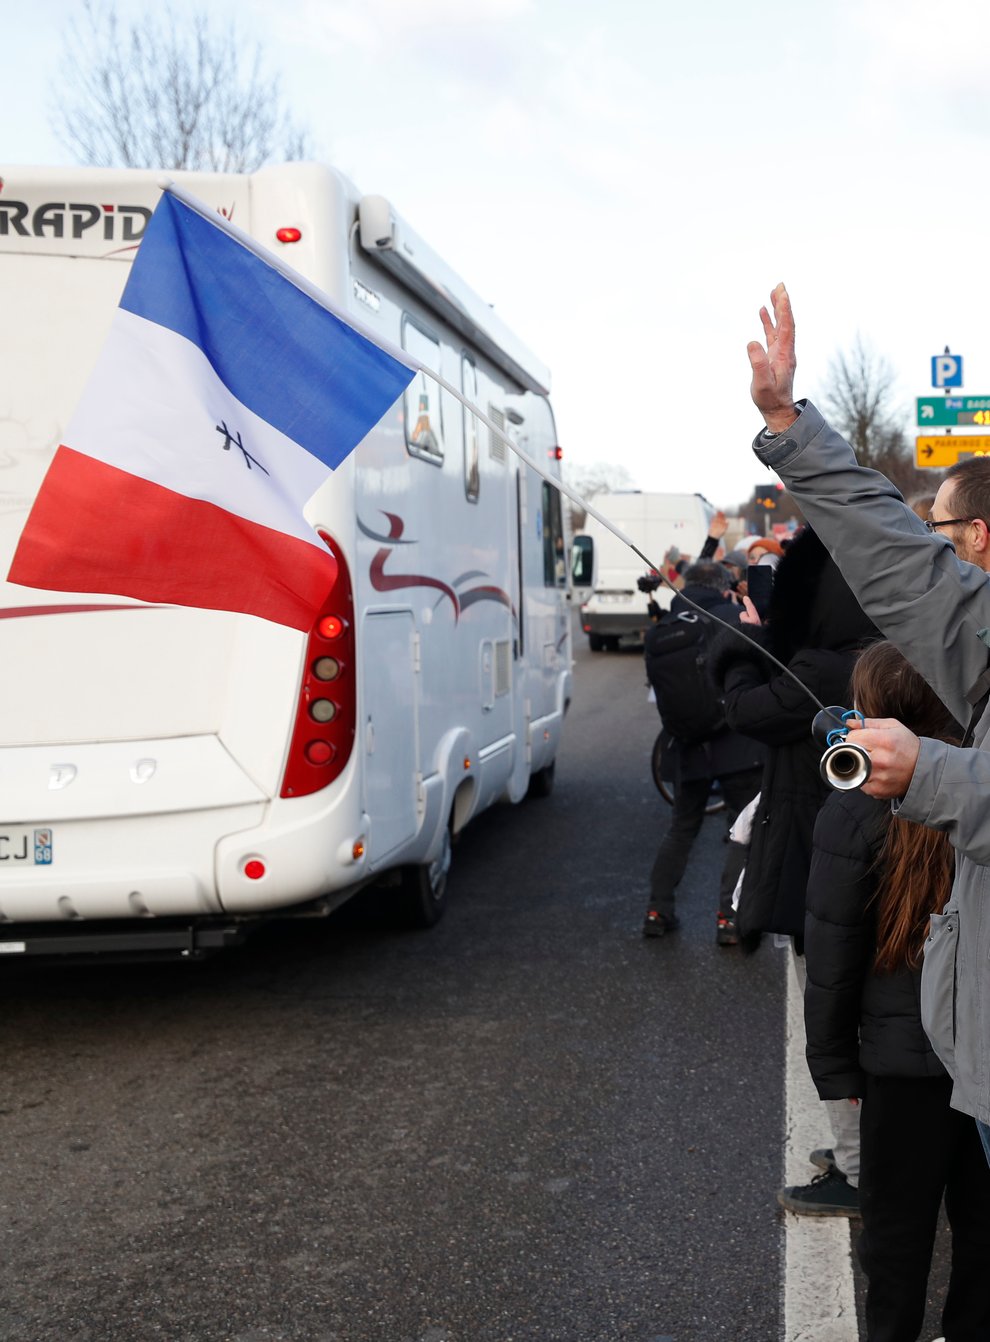 People wave to a convoy departing for Paris in Strasbourg, eastern France (AP Photo/Jean-Francois Badias)